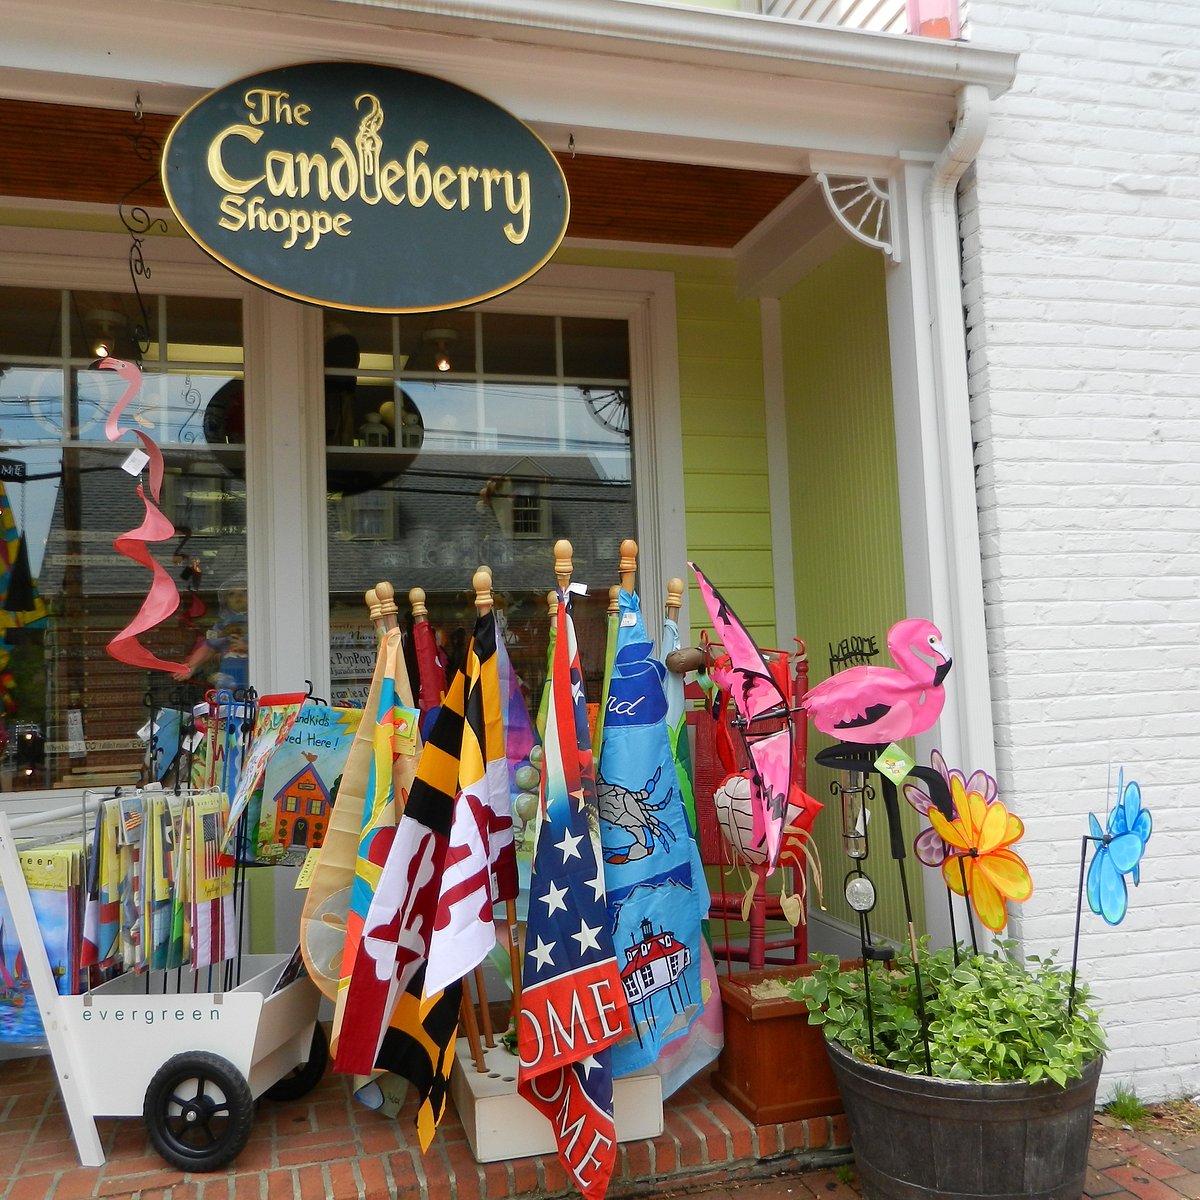 Shoppe. Saint Michaels Maryland things to do. Inn at Perry Cabin. 1 st shop